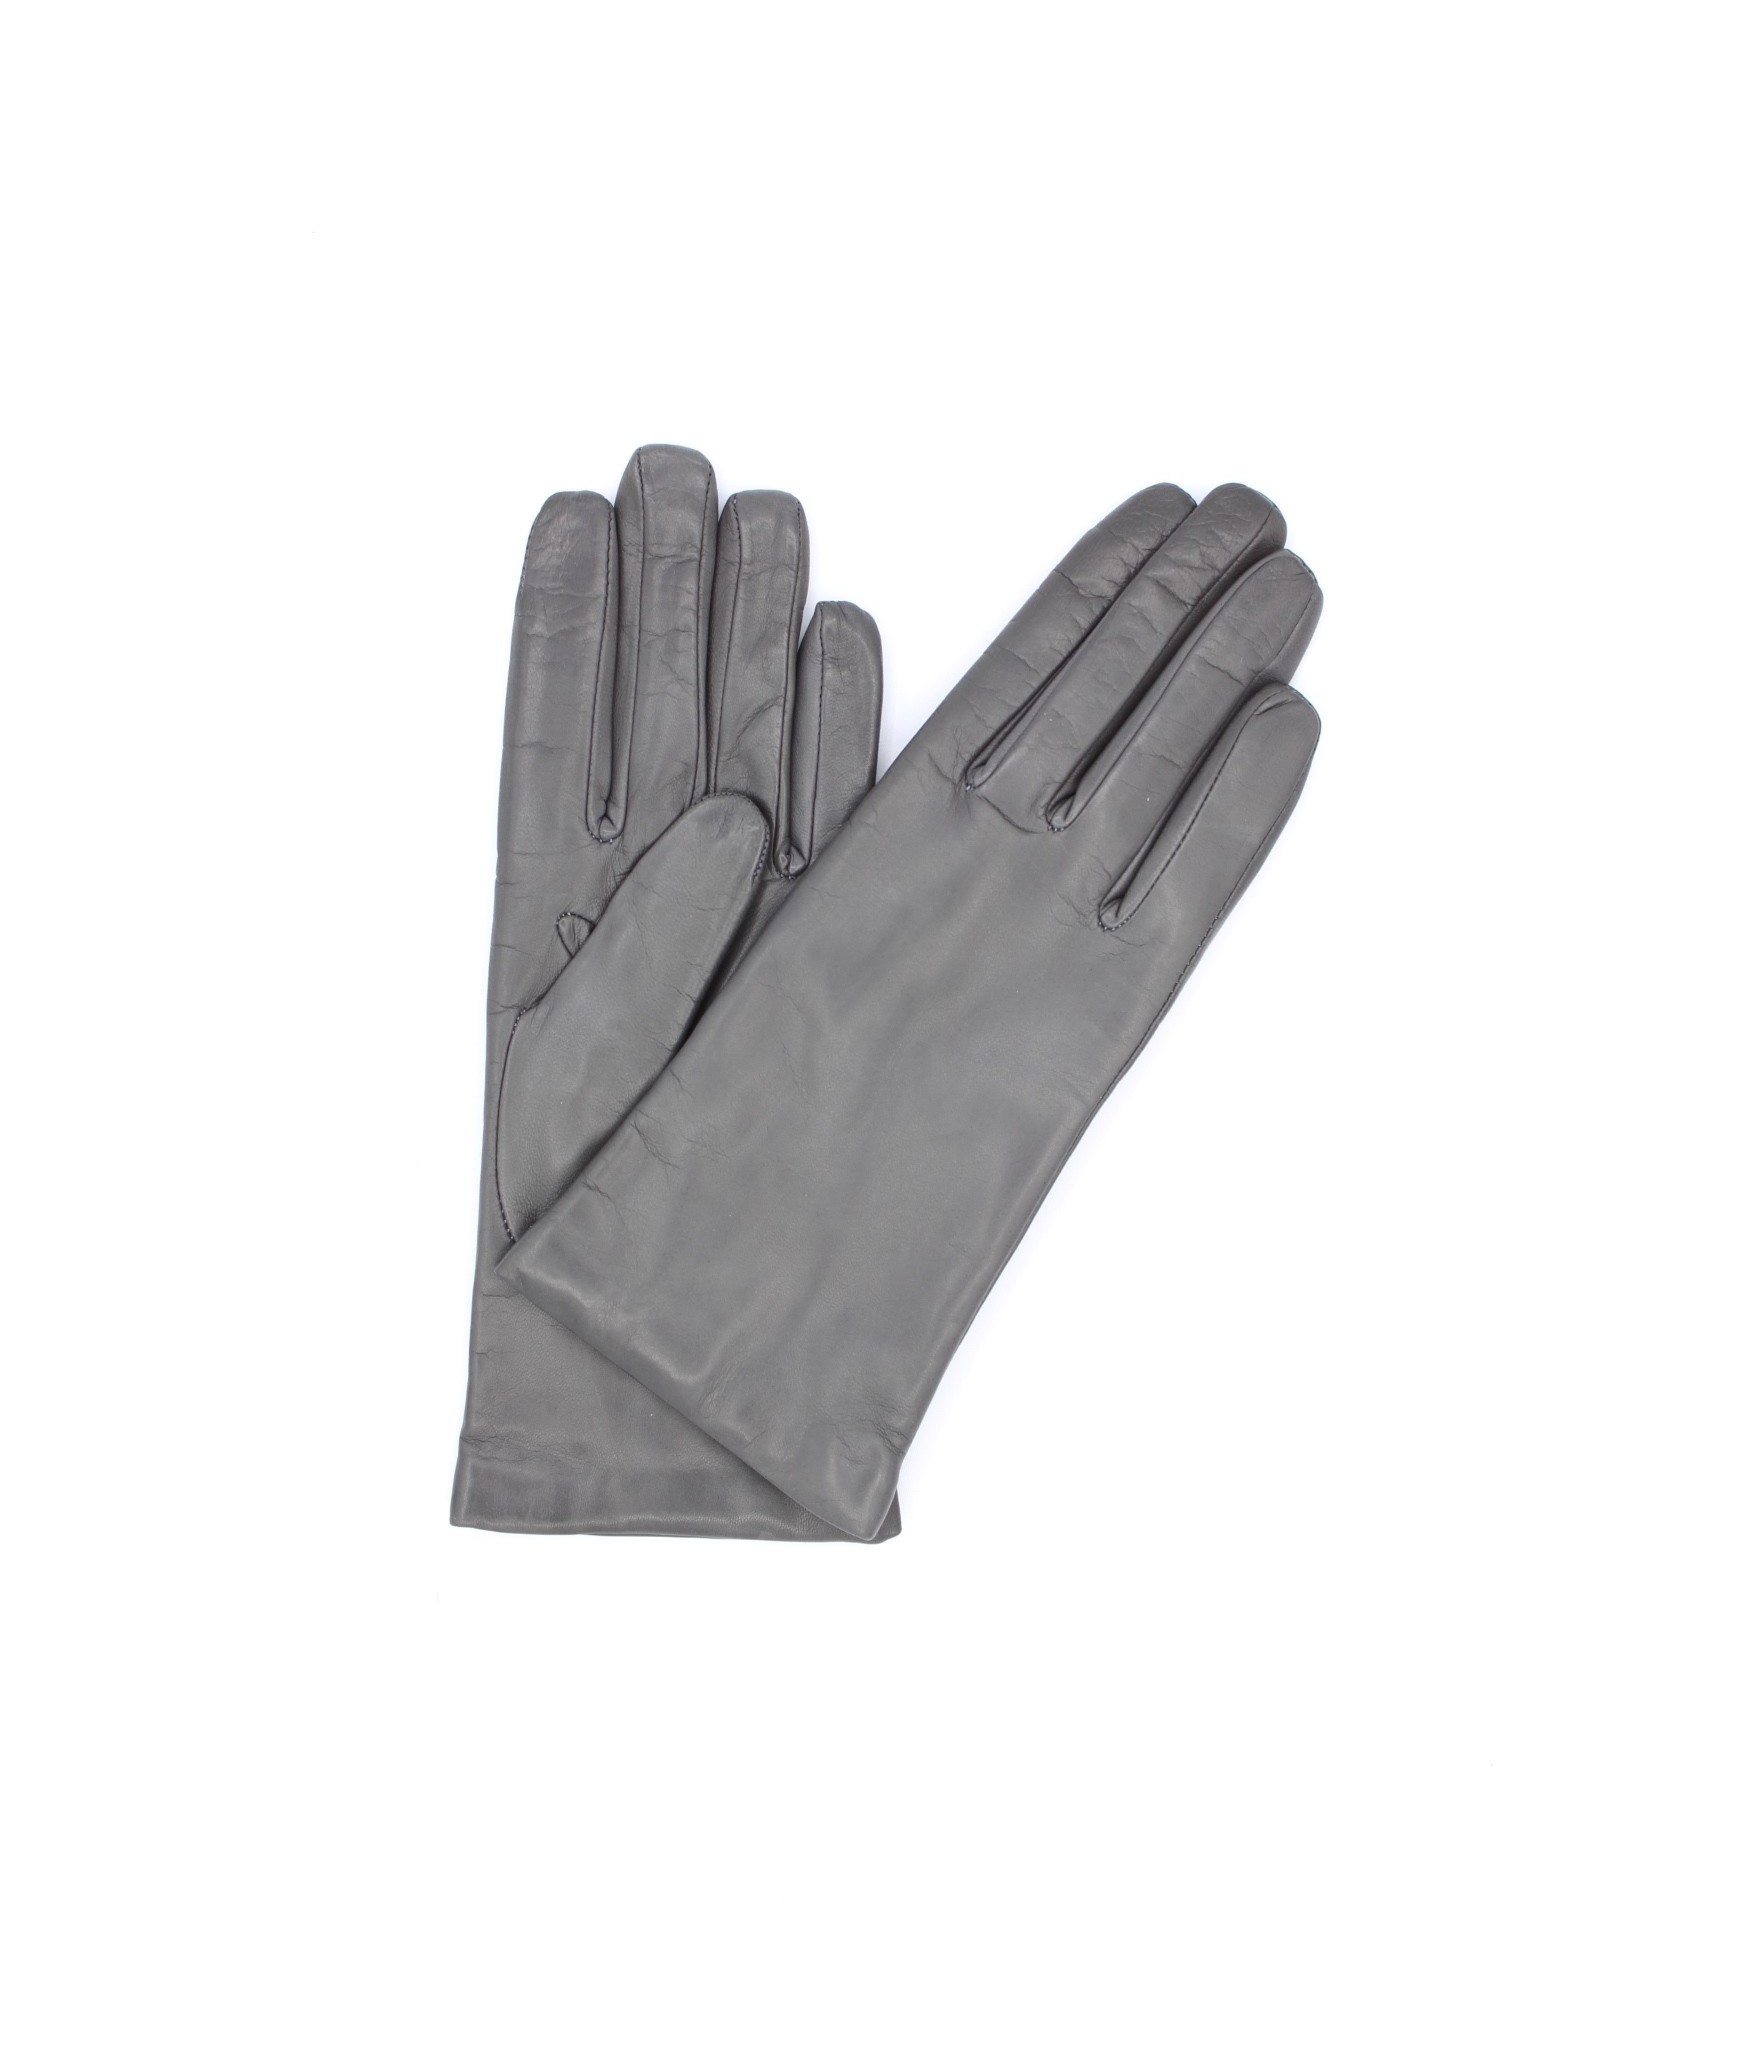 1011 Classic Kid Leather Gloves Cashmere Lined Medium Grey 